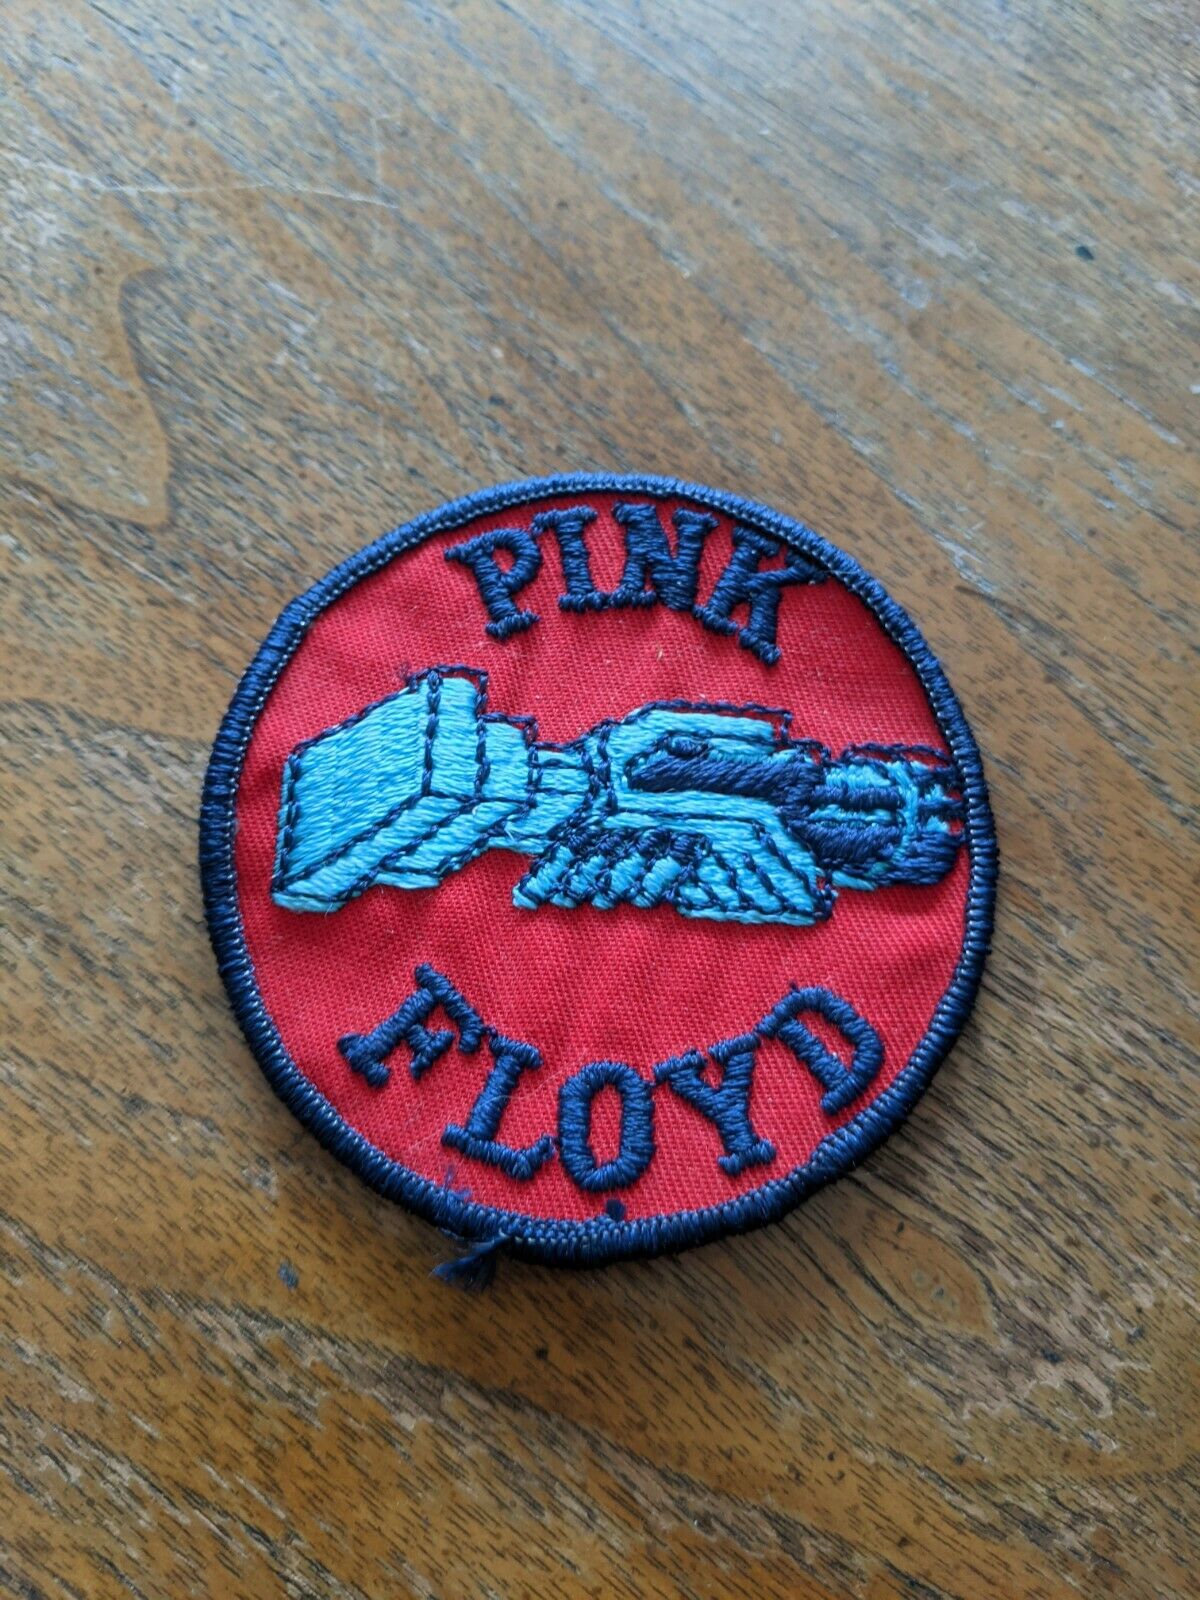 Pink Floyd Vintage Patch Embroidered The Wall Dark Side Of The Moon